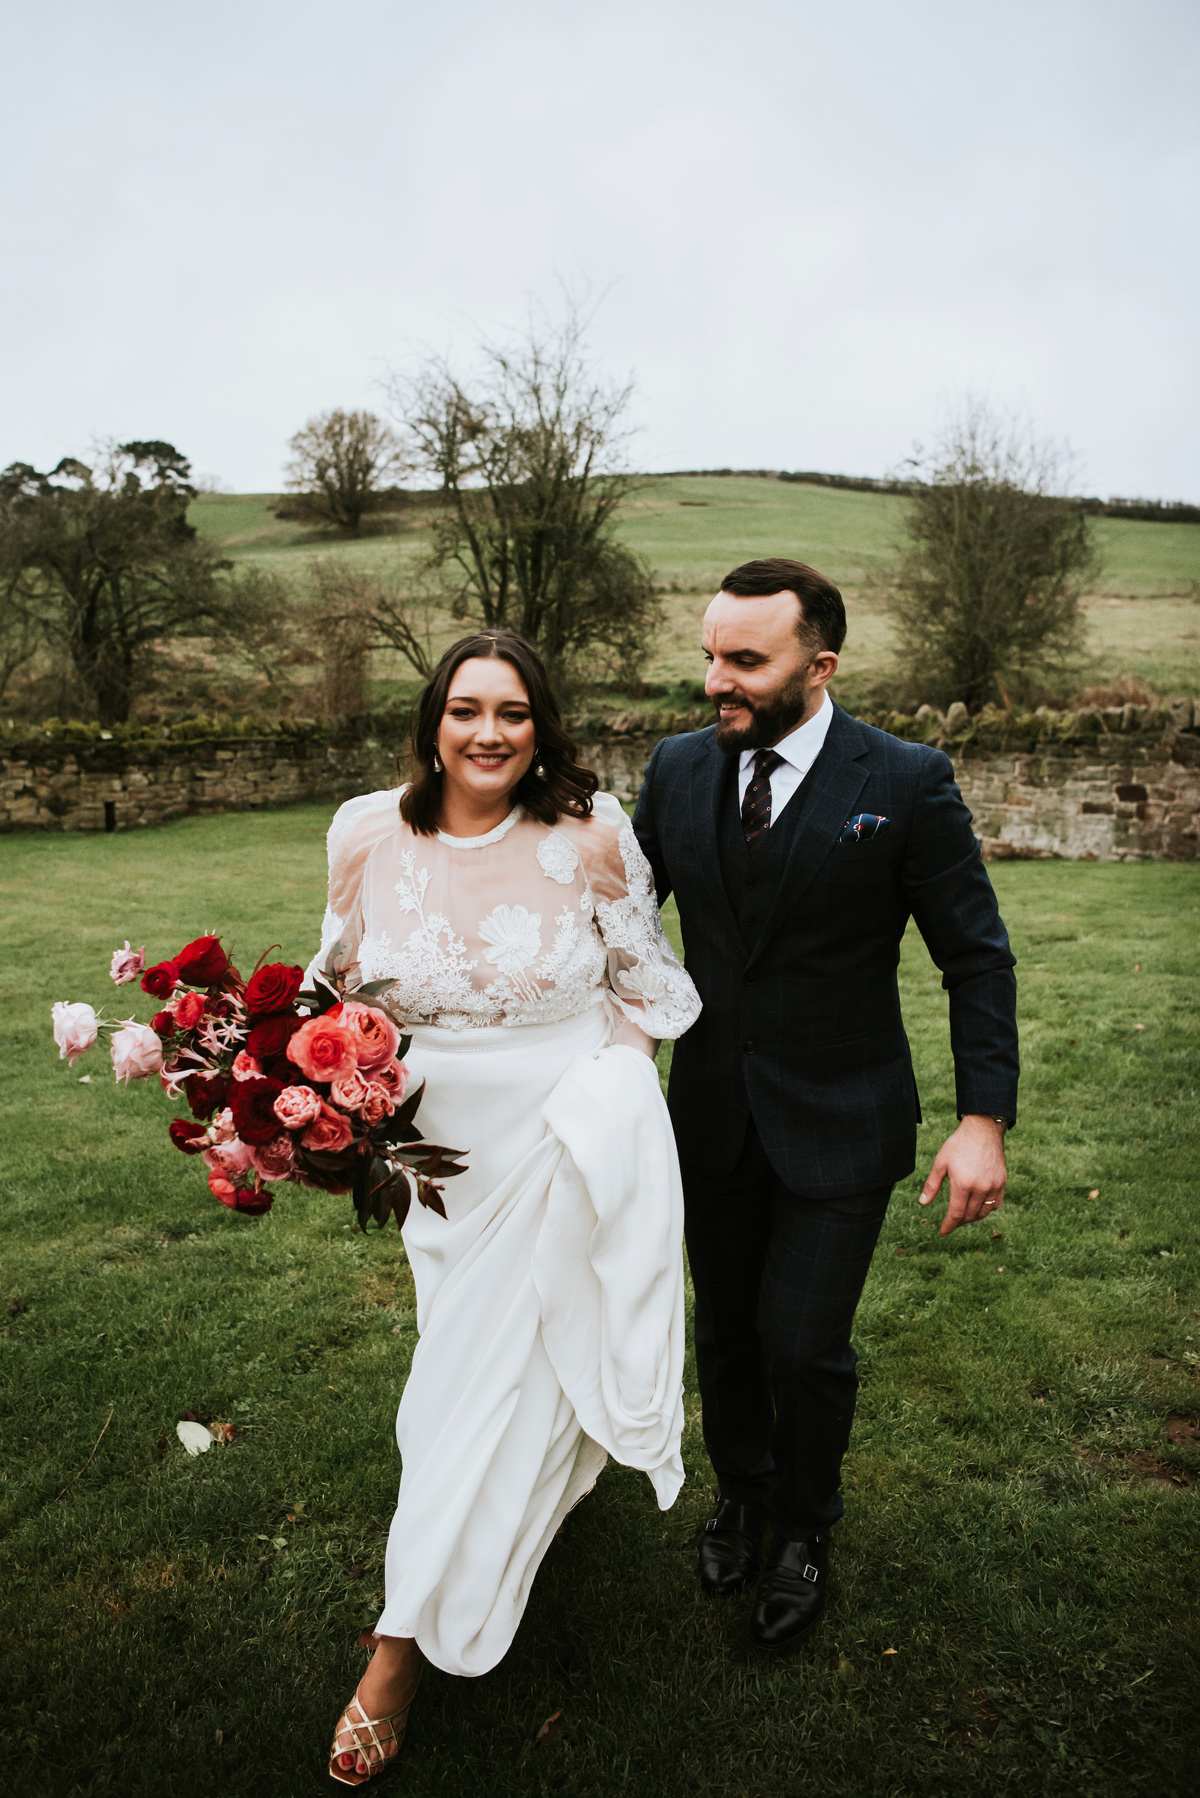 Abigail in Caroline Takvorian for her Romantic Winter Wedding at Lyde Court | Love My Dress®